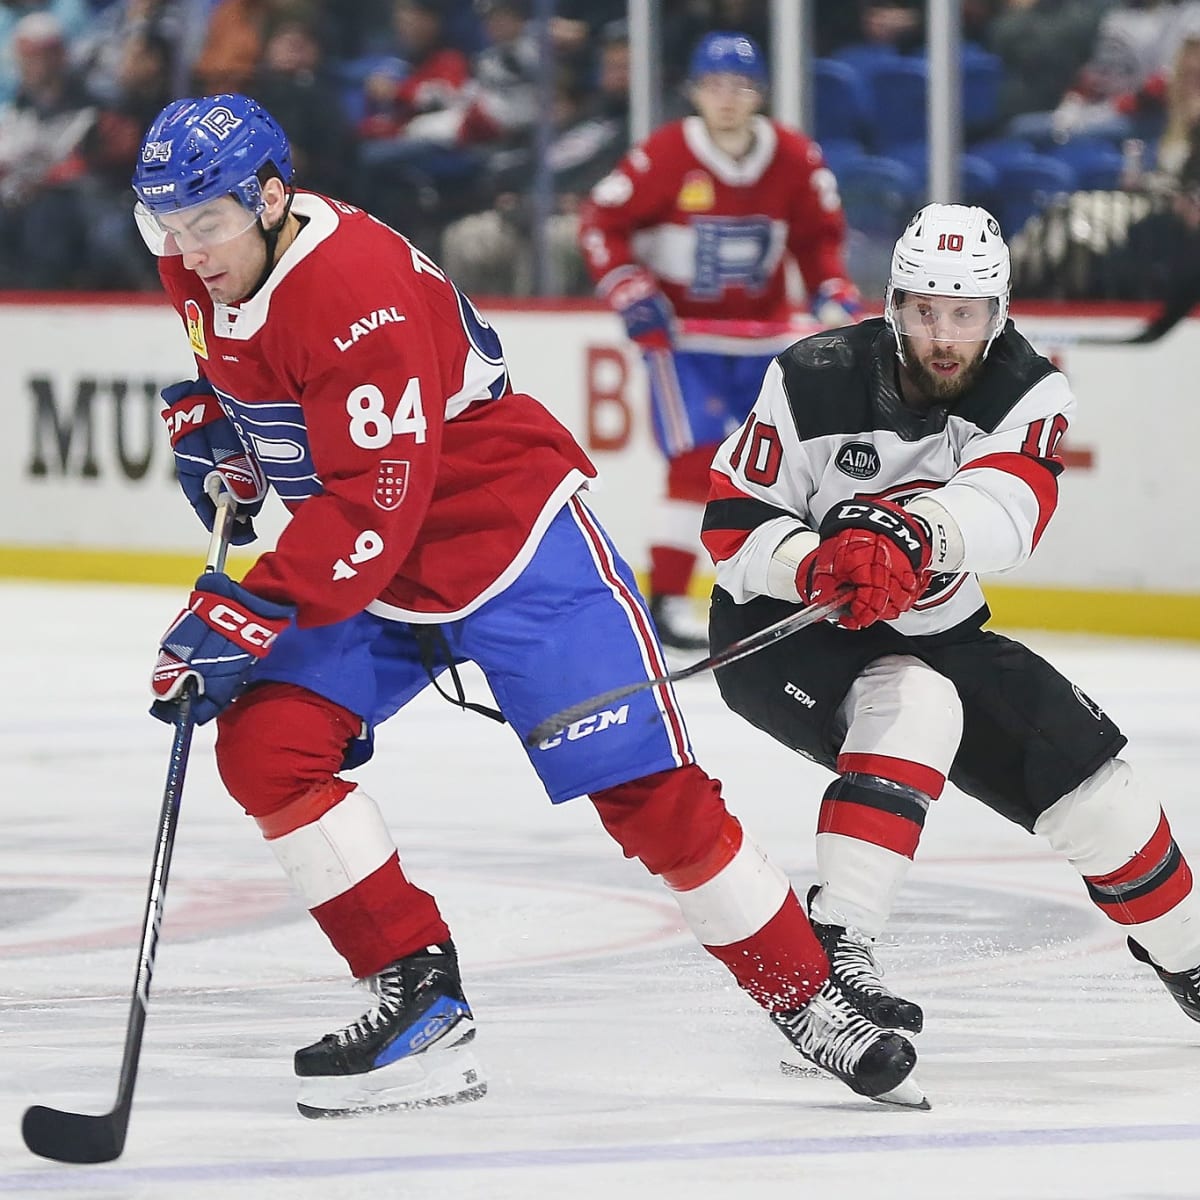 Rocket Take Control In Final Frame  RECAP: UTC @ LAV - The Hockey News  Montreal Canadiens News, Analysis, and More